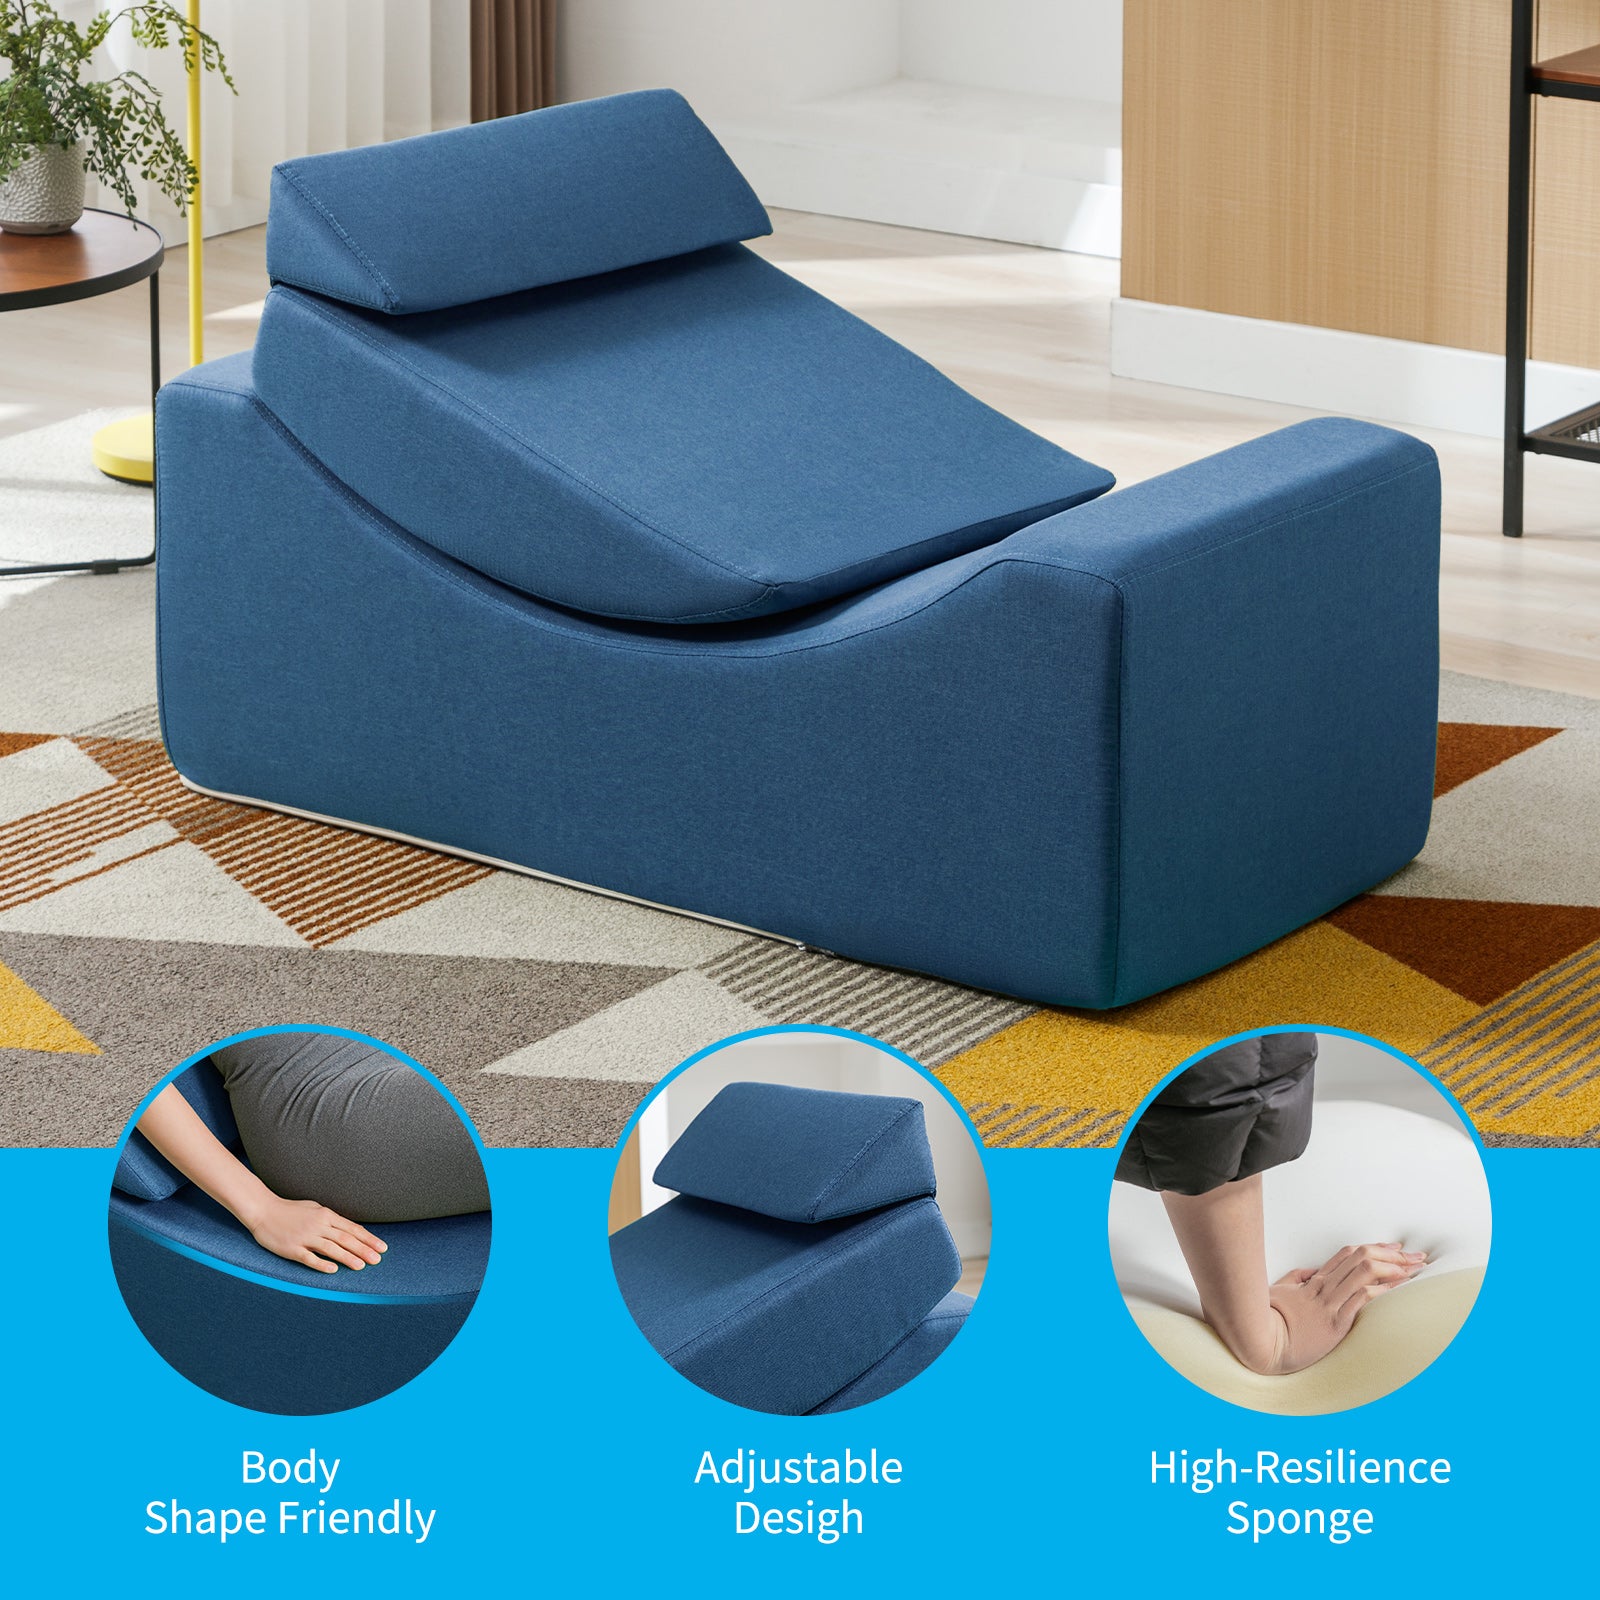 Mjkone Zero Gravity Chaise Longue for Yoga, Multi-Functional Foam Recliner for Living Room, Ergonomic Positioning for Better Relaxation/No Need Assembly/Space Saving